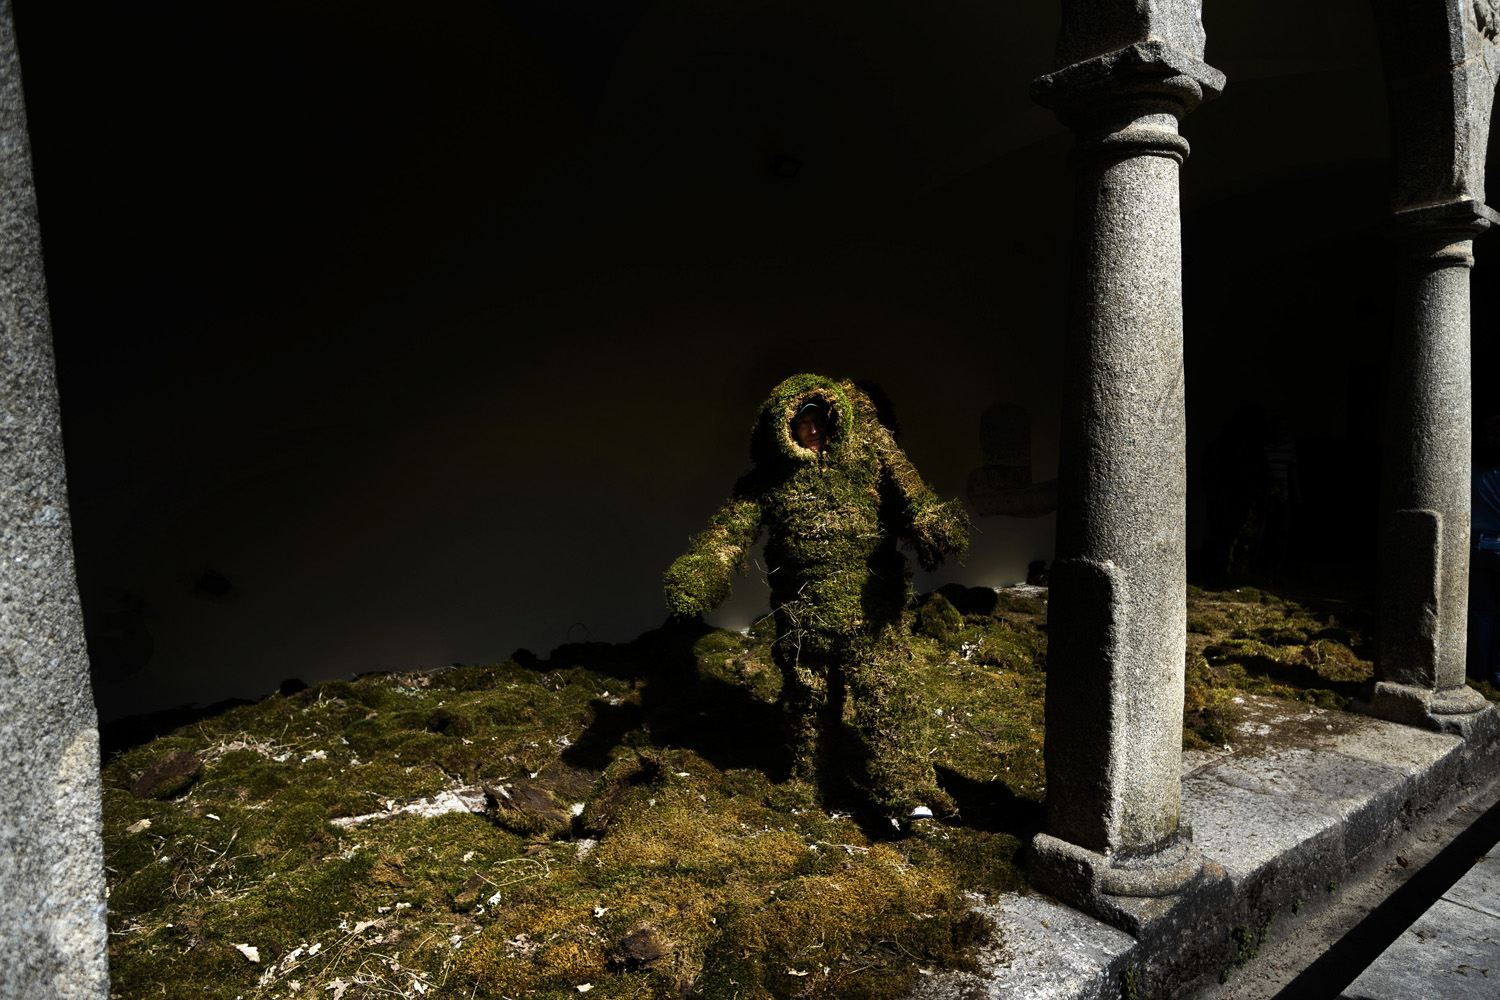 A man dressed in moss walks towards the beginning of the Moss Men procession as a part of the Corpus Christi procession in the small village of Bejar, Spain on June 22, 2014.